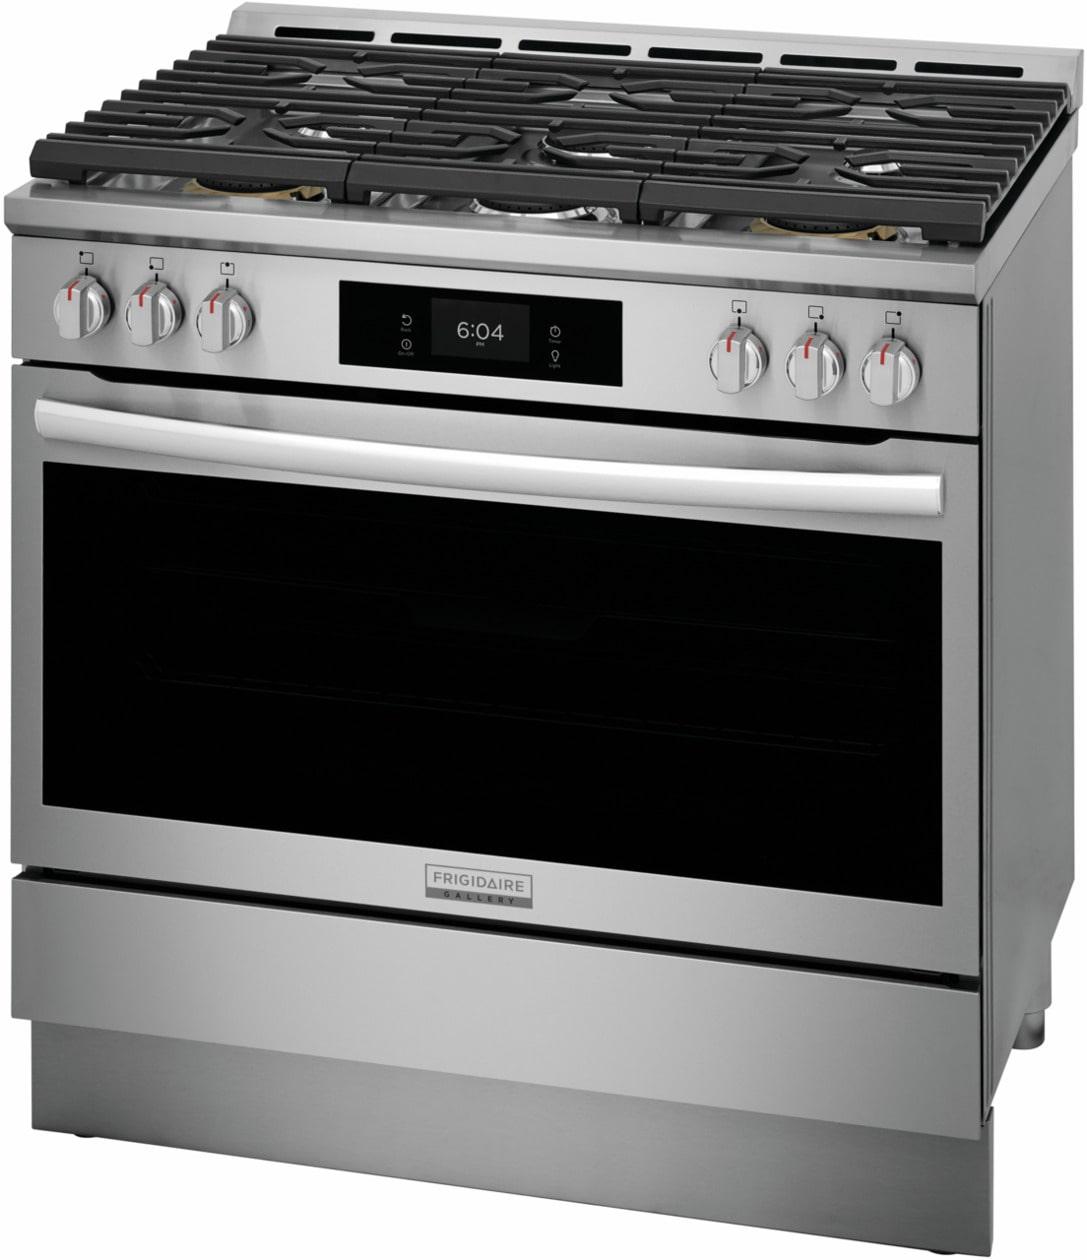 Frigidaire Gallery 36" Gas Range with Air Fry